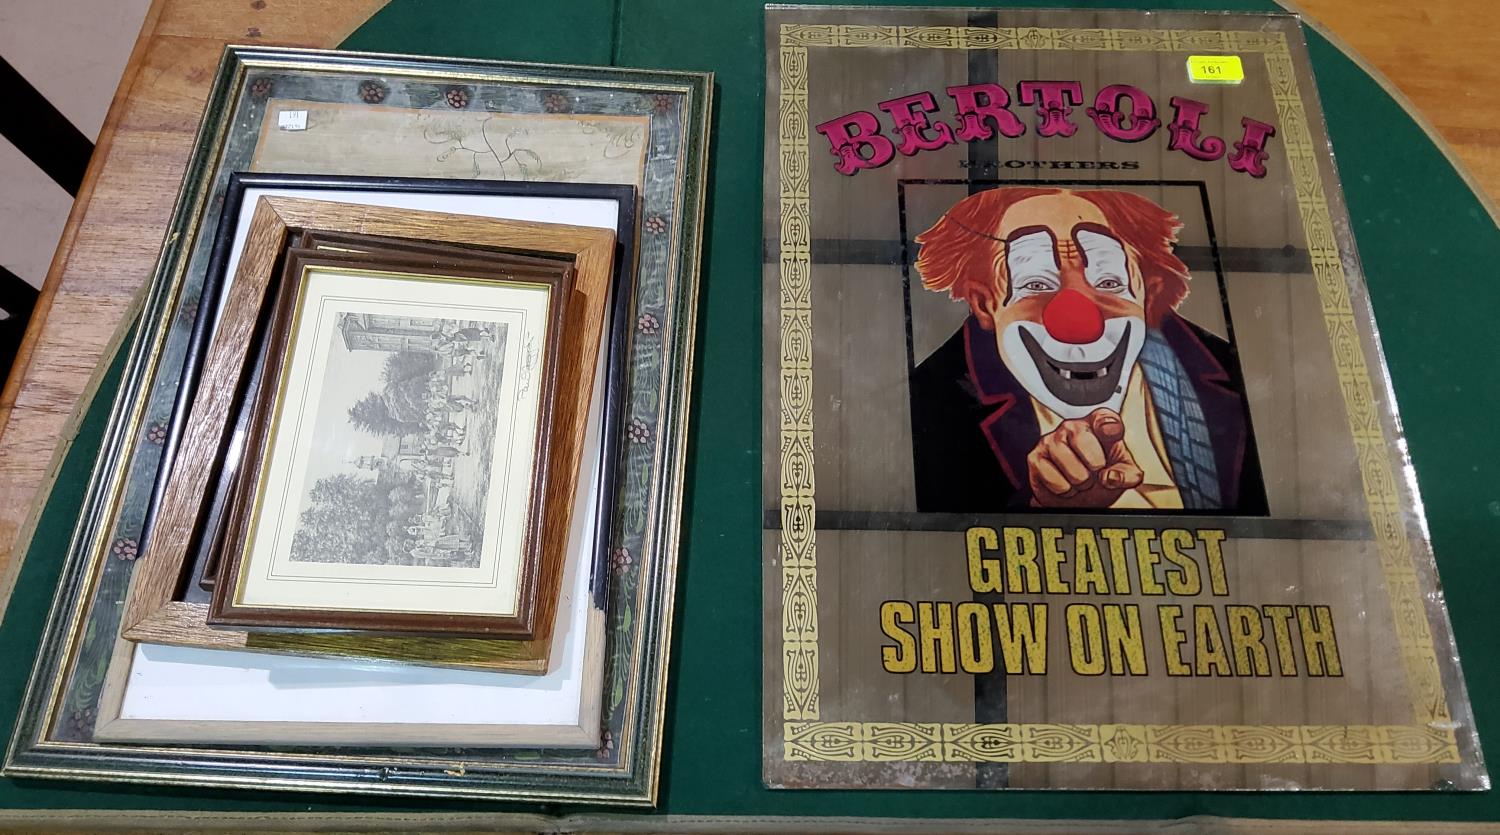 An advertising mirror depicting a clown + other pictures and prints.